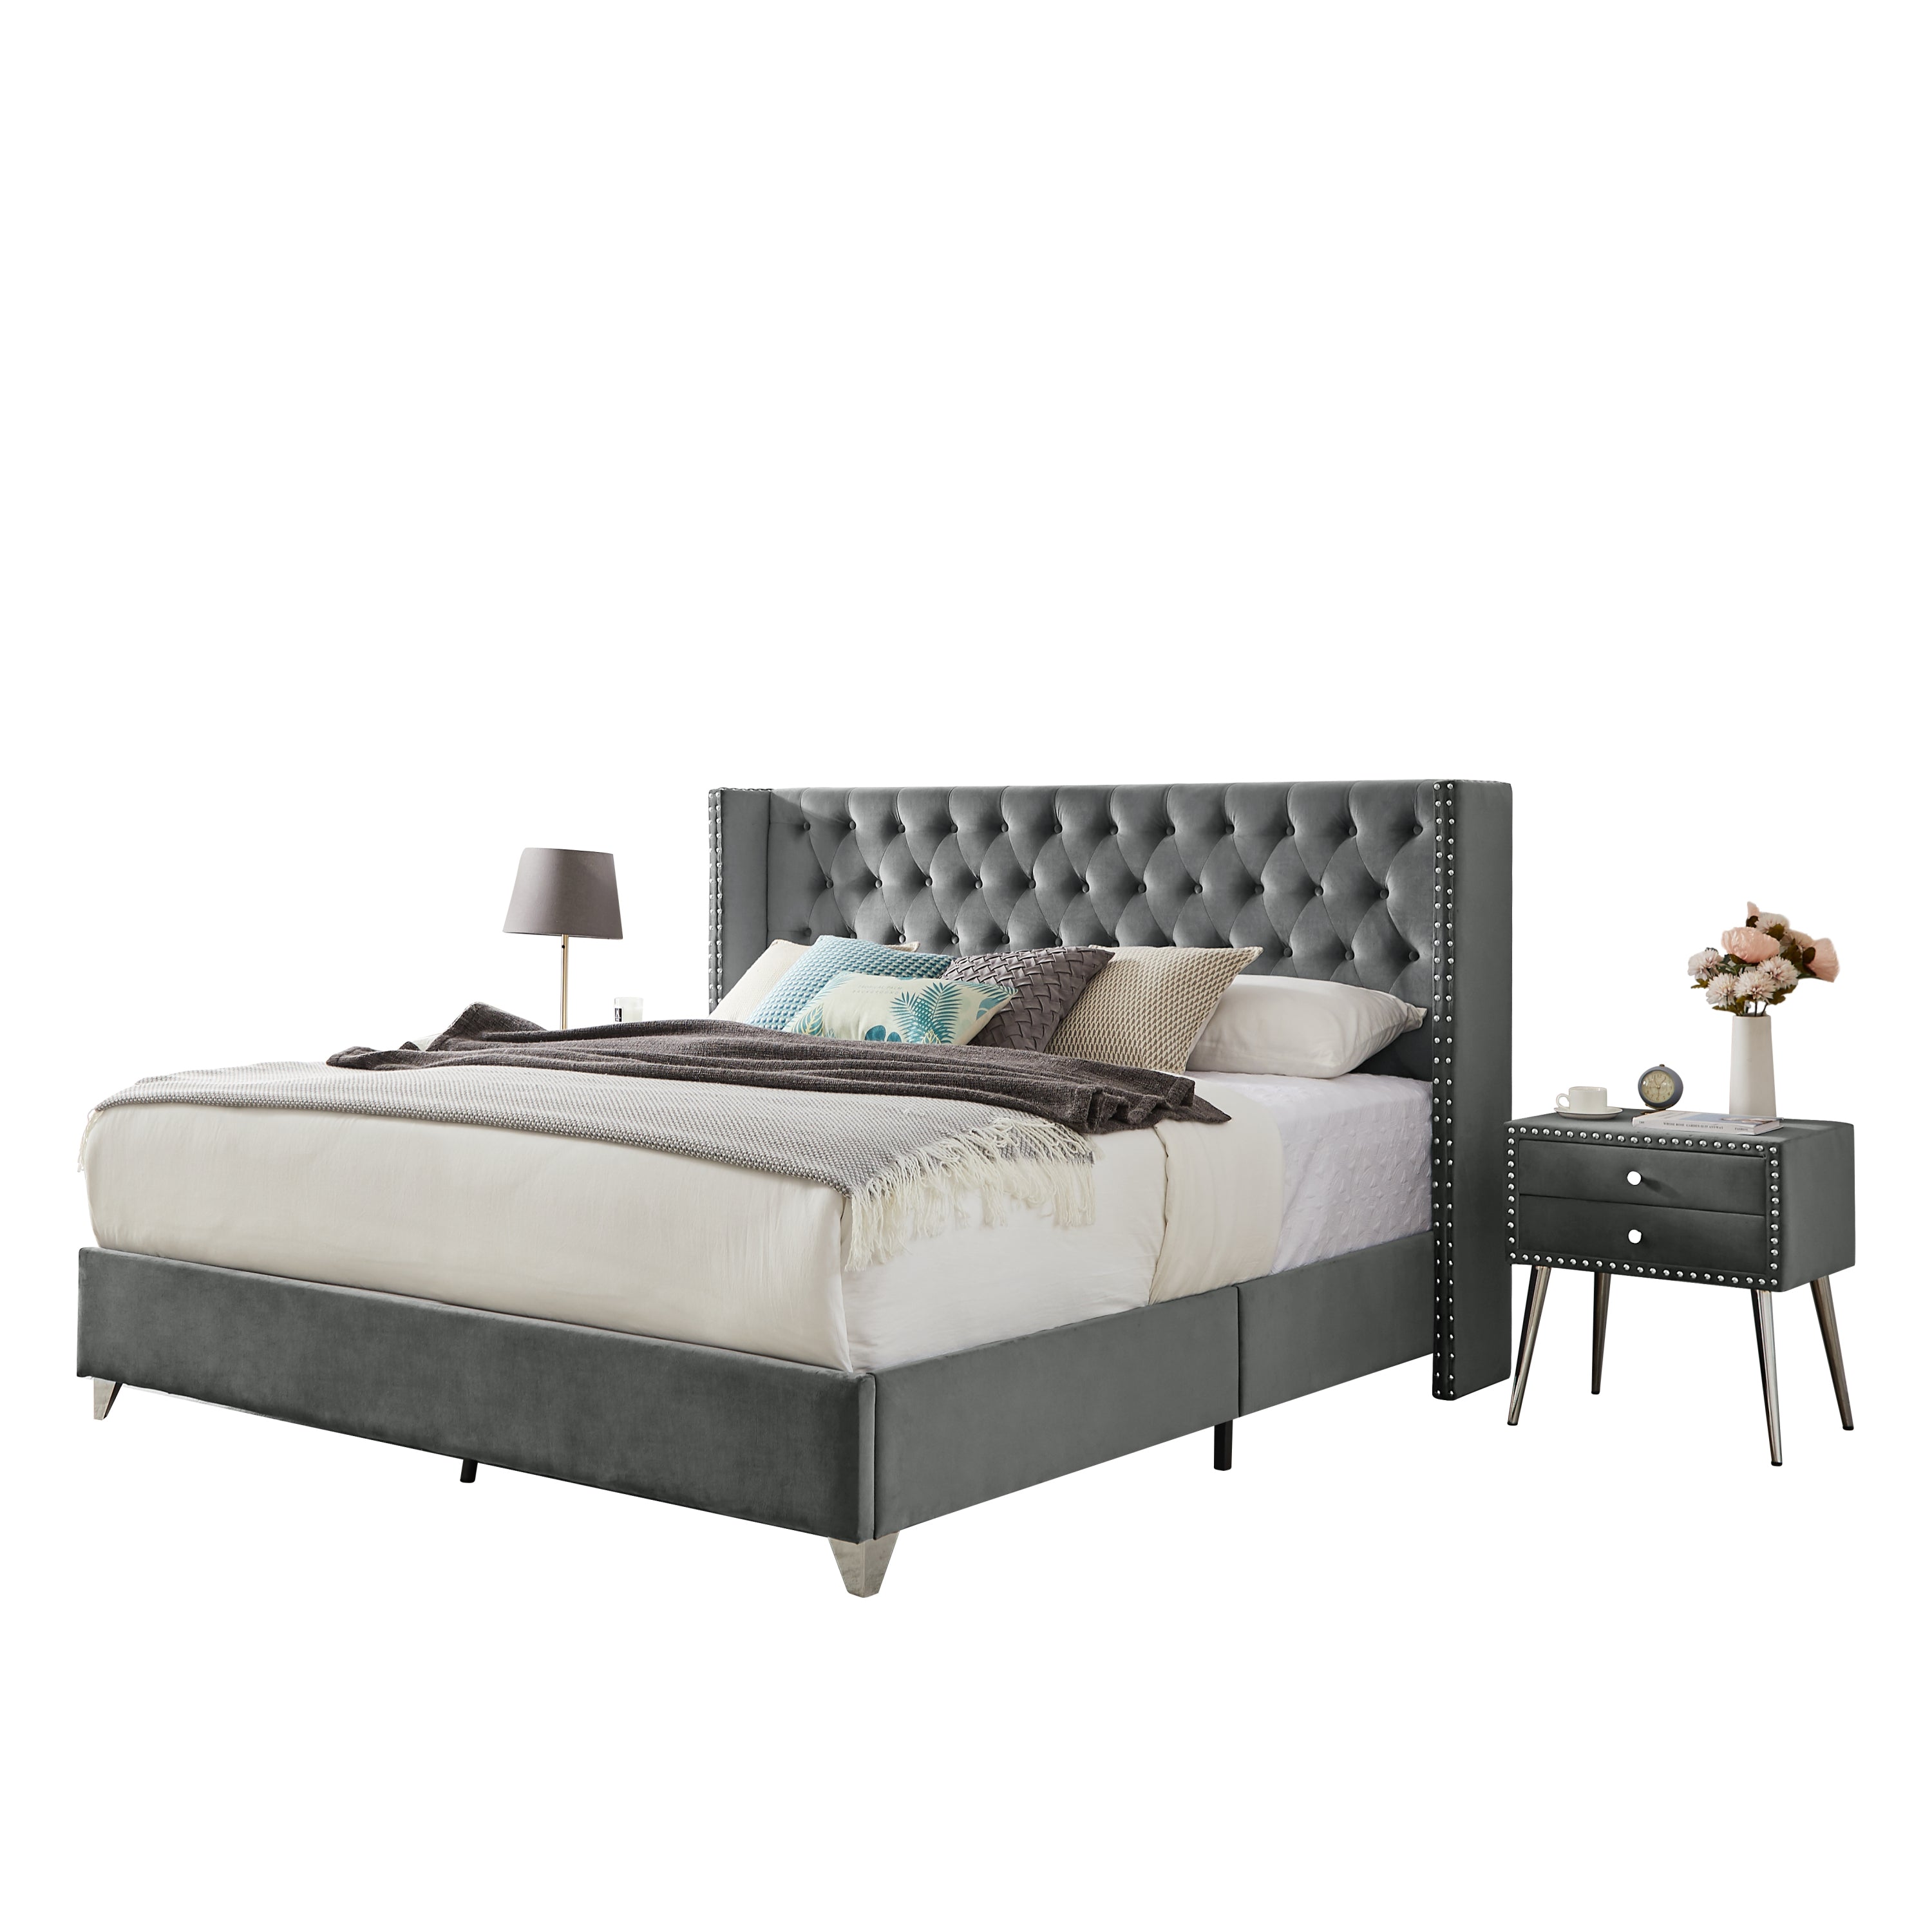 Velvet Headboard Bed with Wooden Slats & Two Nightstand By: Alabama Beds